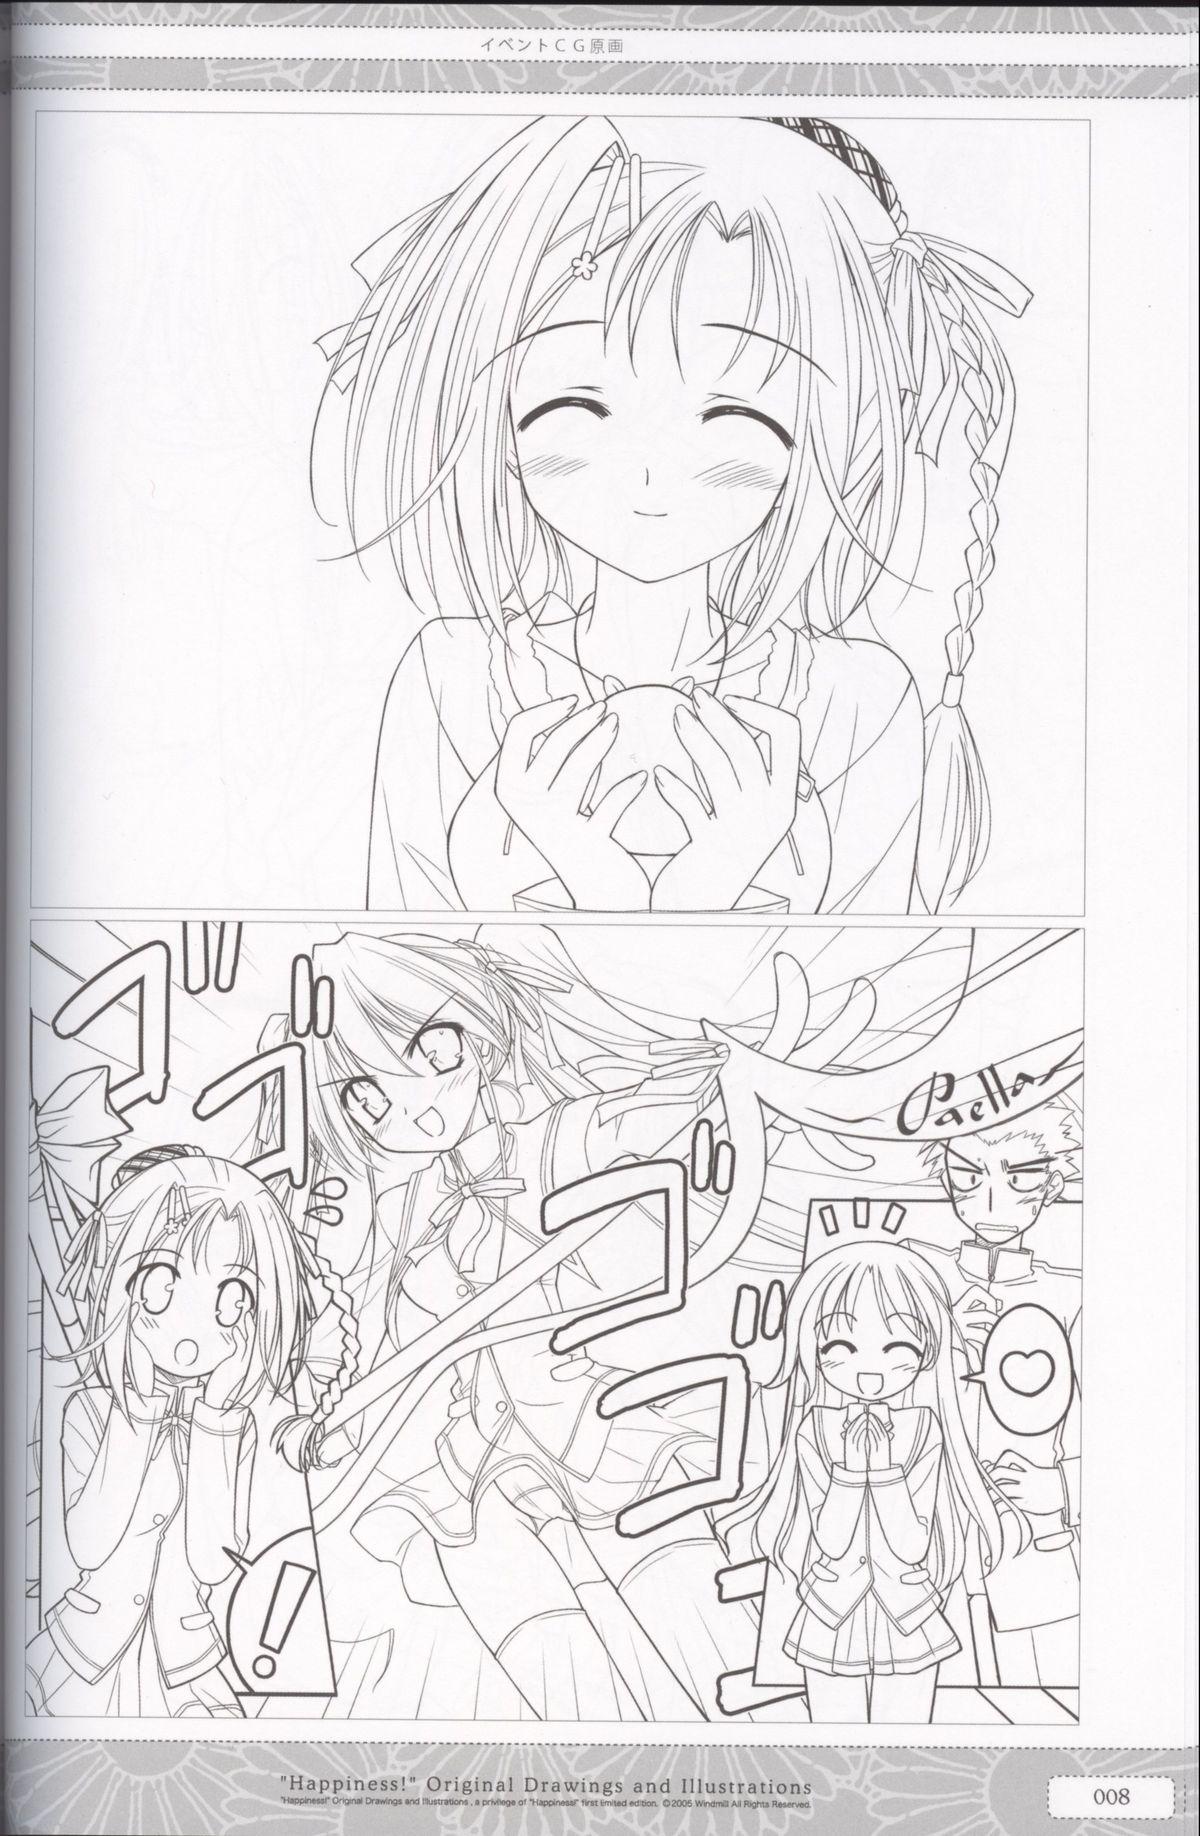 Leite "Happiness!" Original Drawings and Illustrations - Happiness Pure18 - Page 8